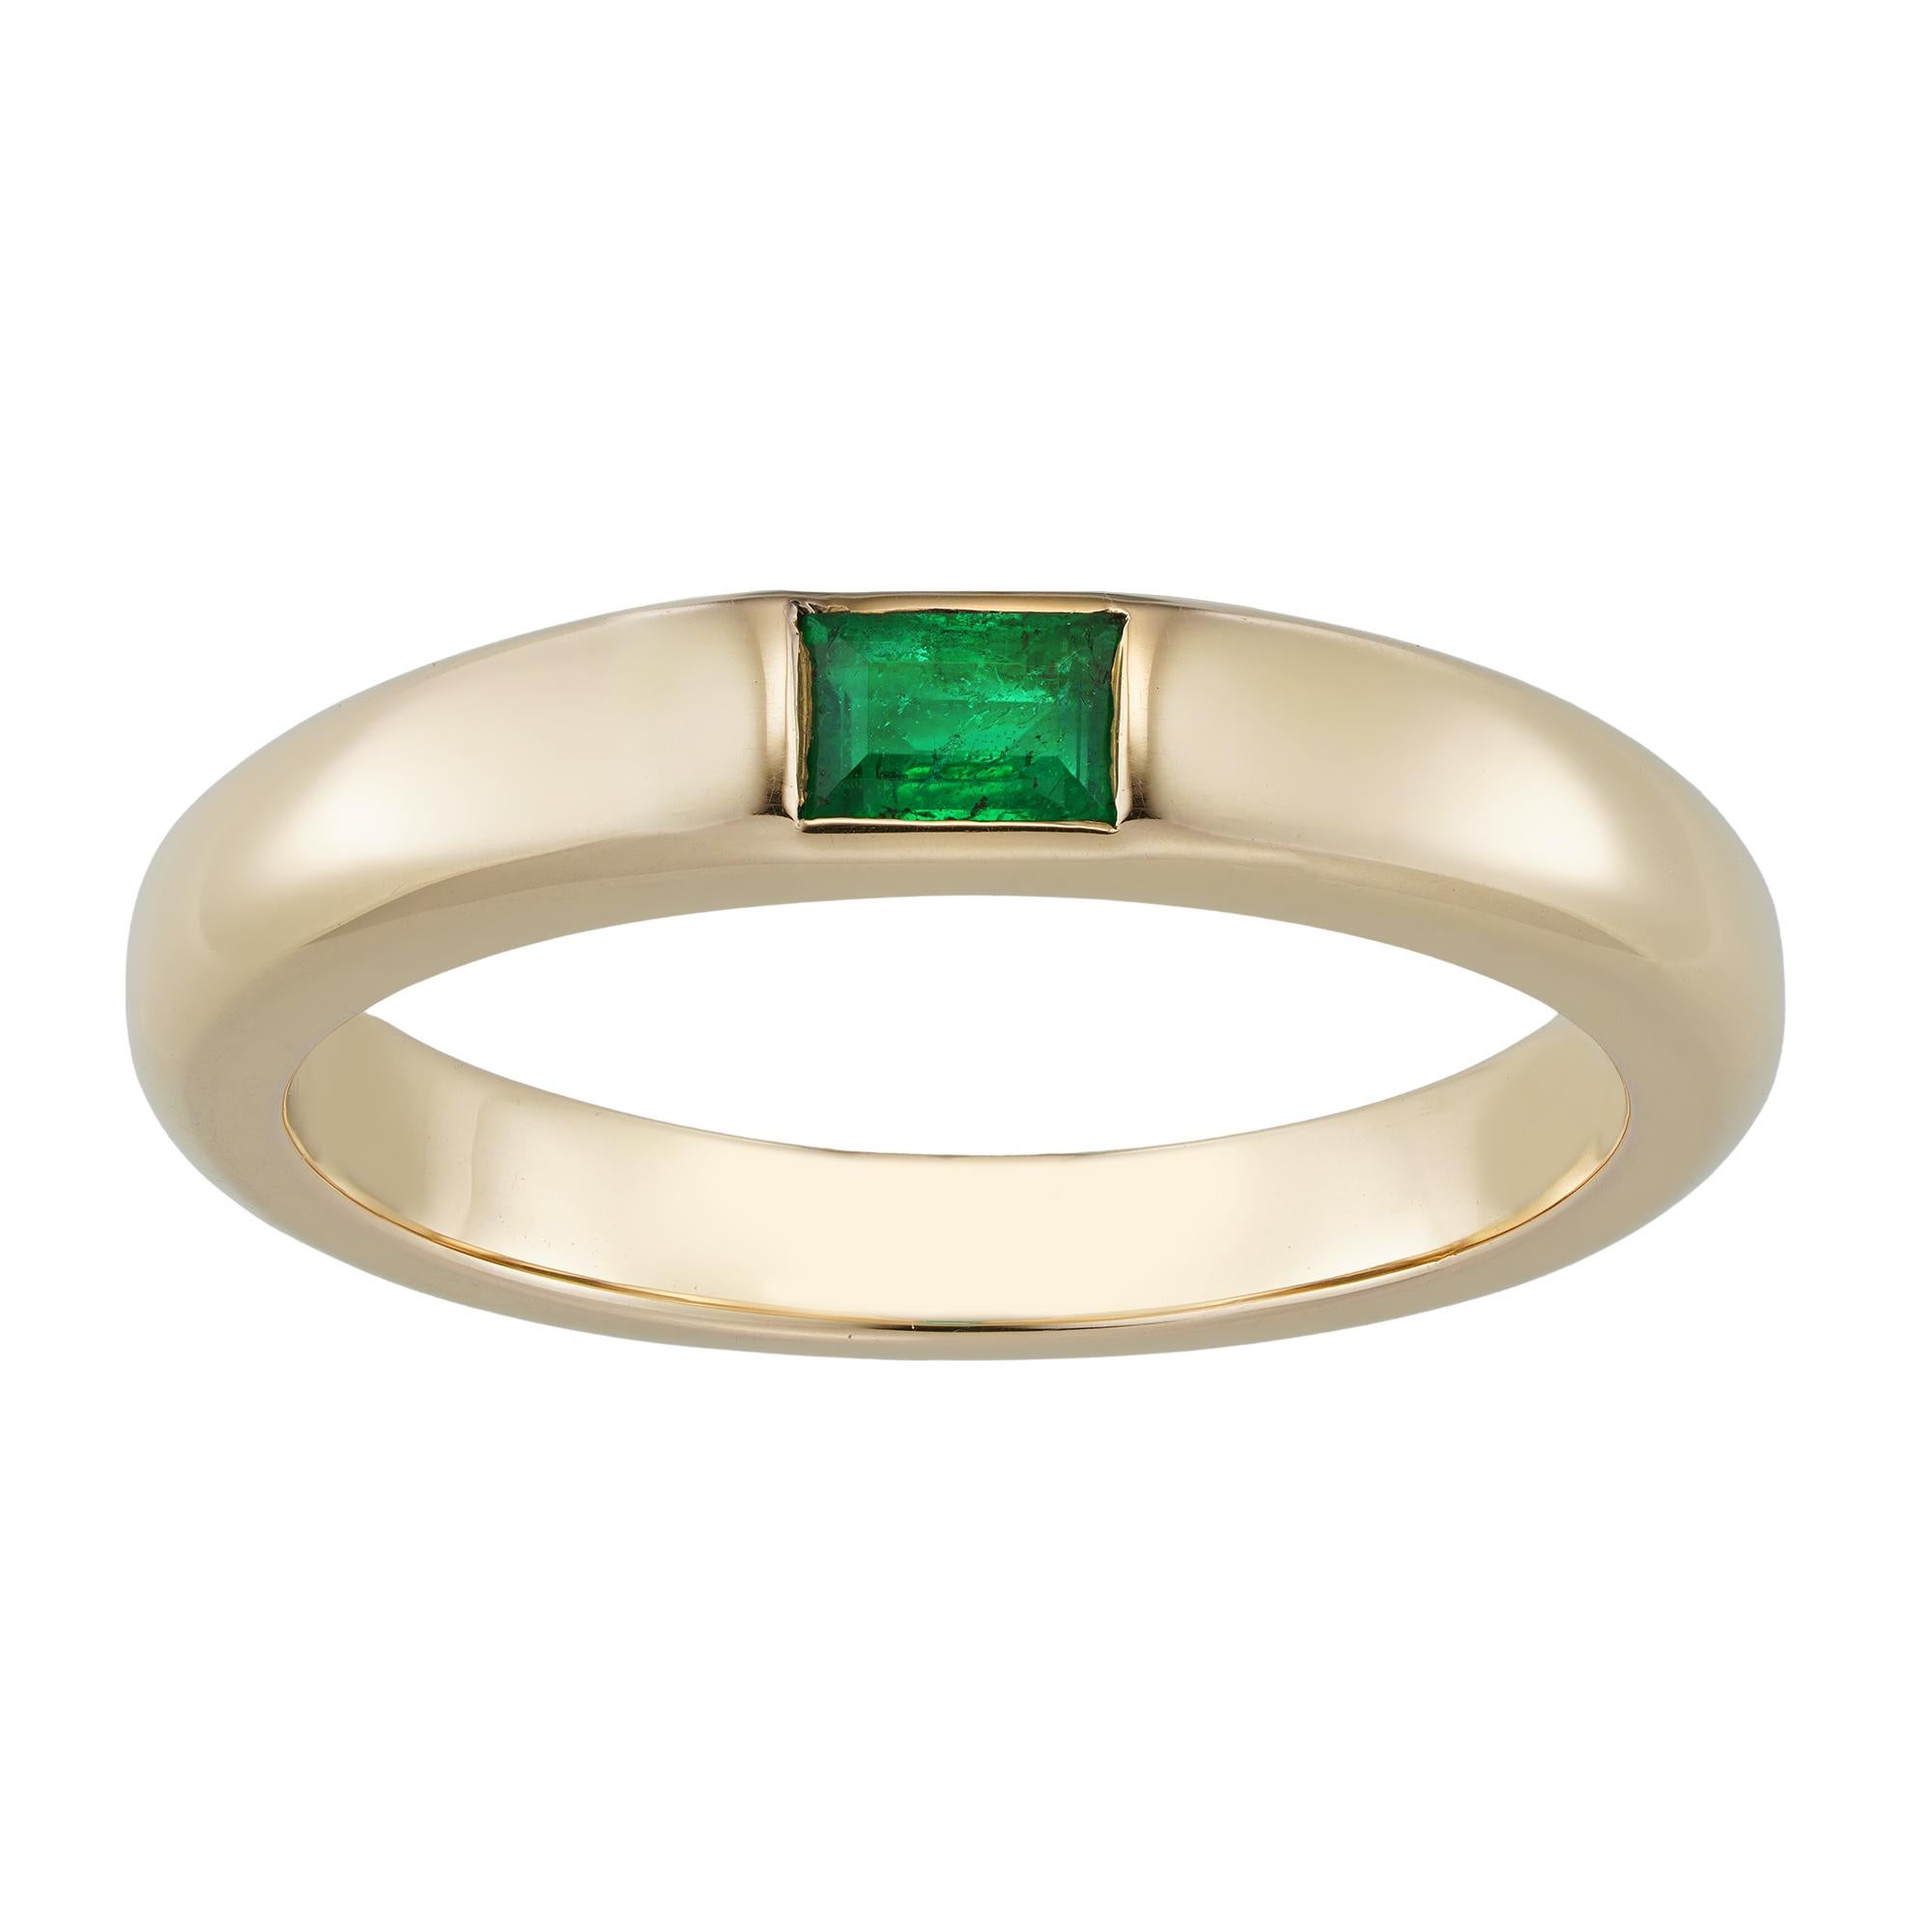 An 18ct rose gold Bentley & Skinner 'token' ring with a horizontally-aligned baguette-cut emerald, measuring approximately 3.9mm x 2.8 x 2.0mm, the rose gold band tapering from 3.7mm - 2.7mm, hallmarked London, Bentley & Skinner sponsor's mark, size